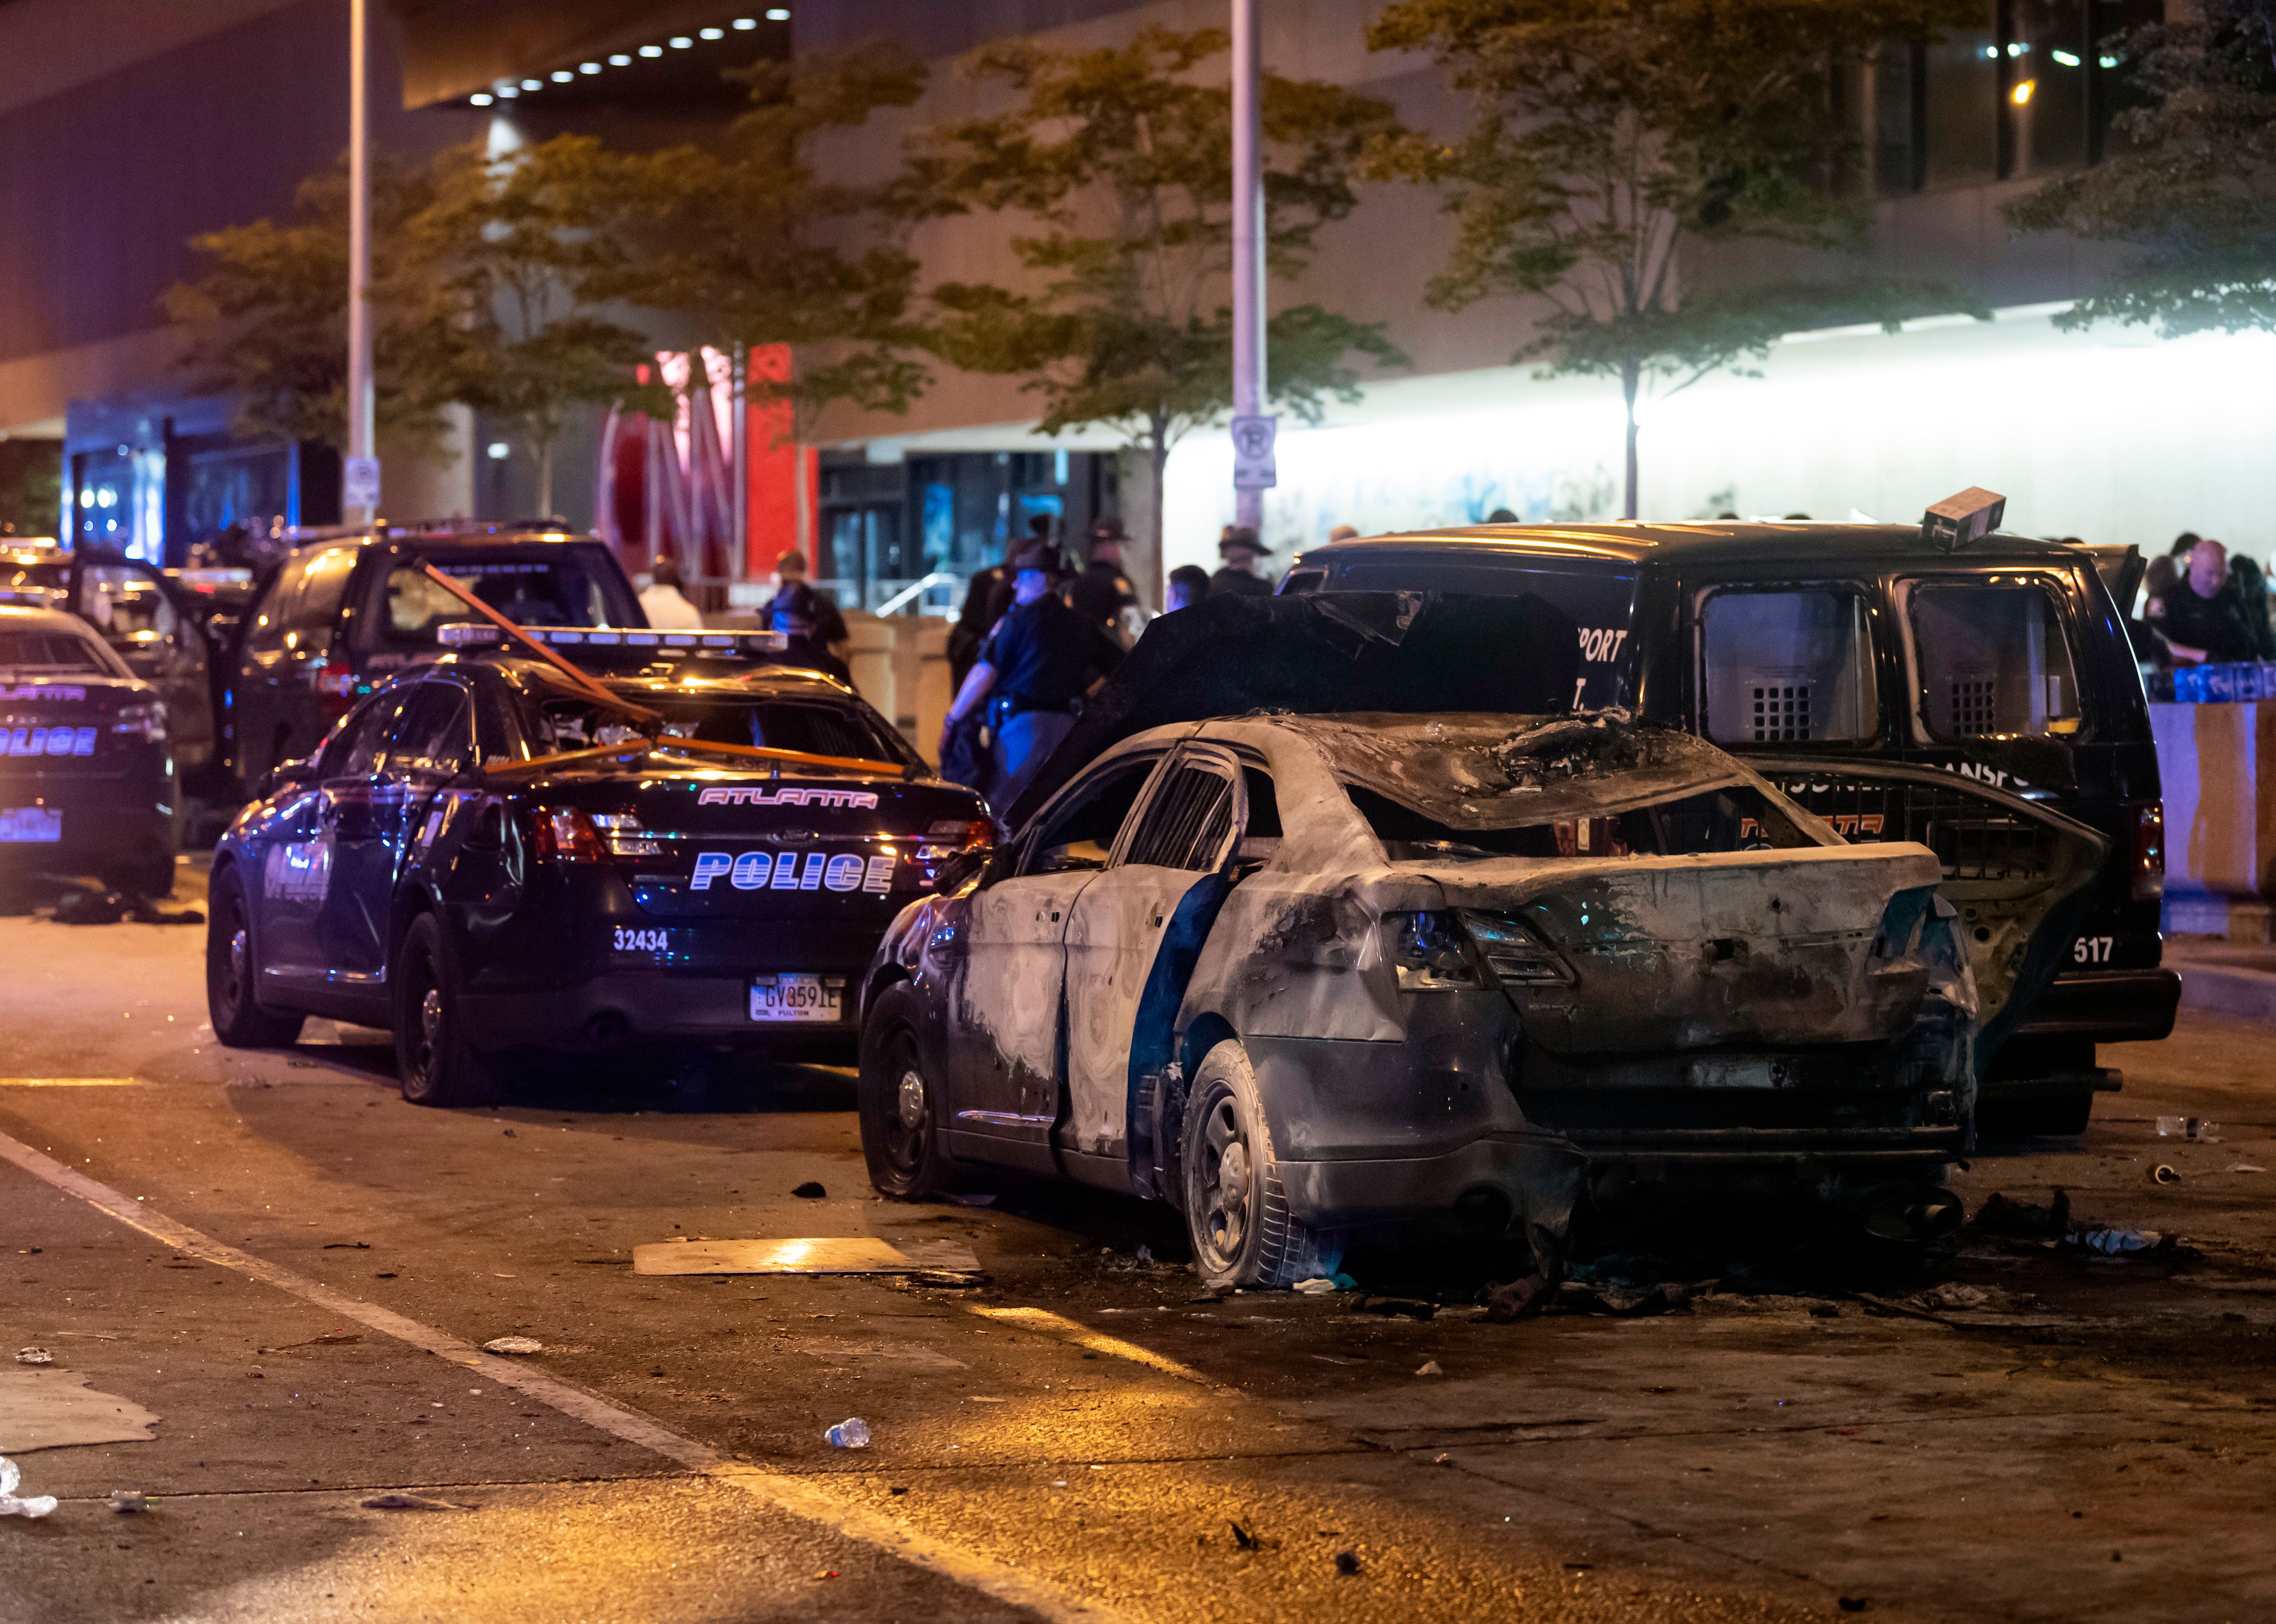 A burned out car sits idle during rioting and protests in Atlanta on May 29, 2020. (Photo by JOHN AMIS/AFP via Getty Images)